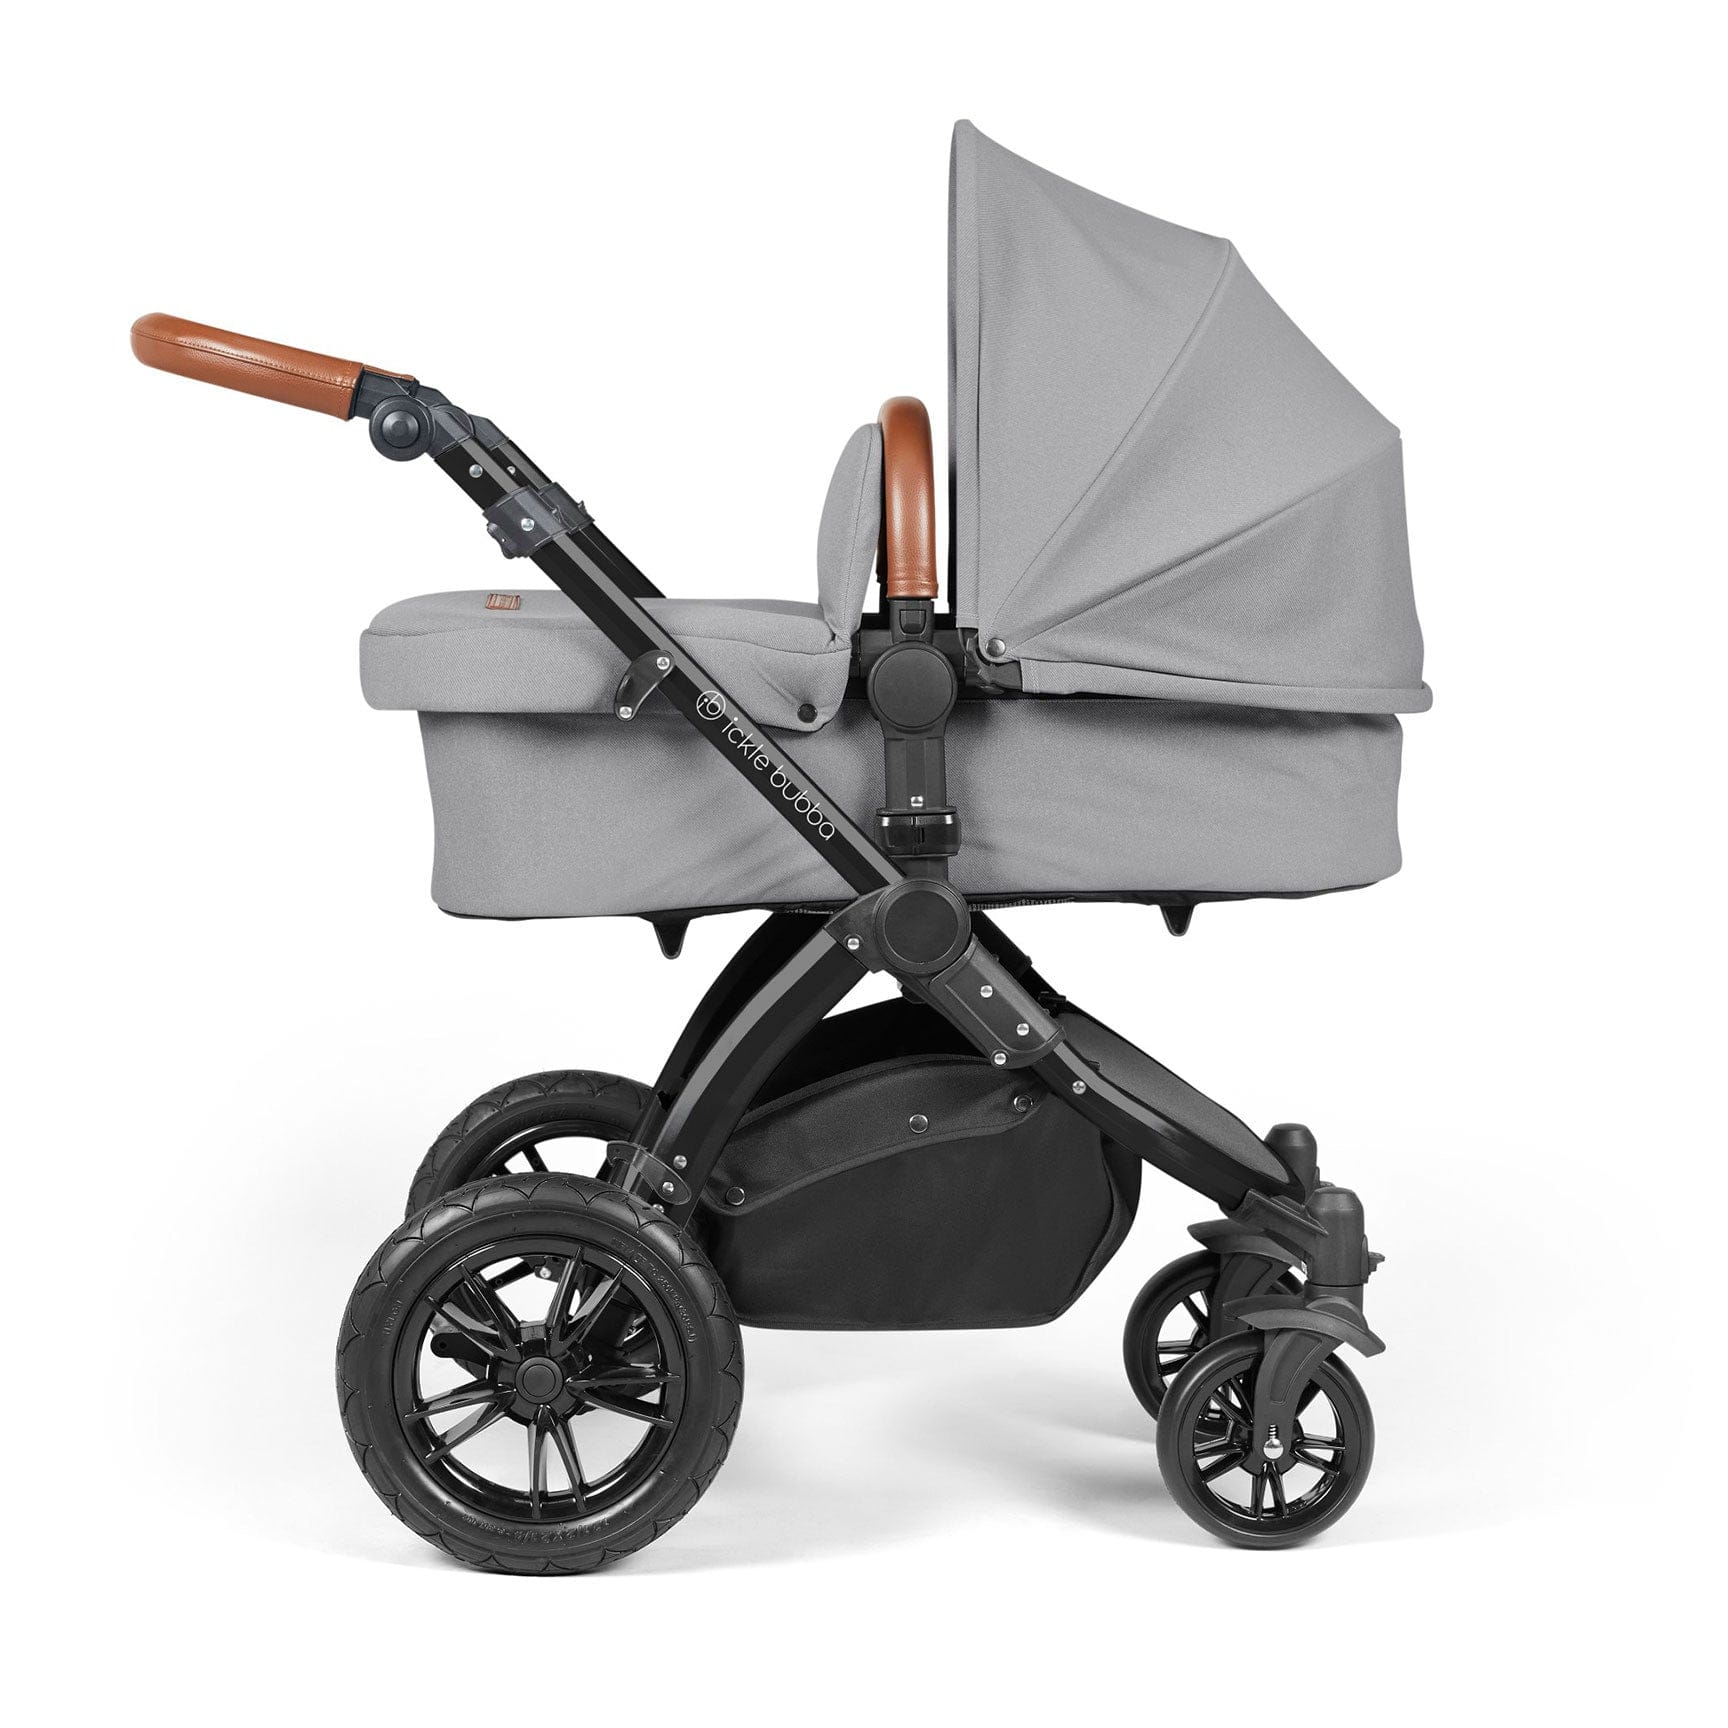 Ickle Bubba travel systems Ickle Bubba Stomp Luxe All-in-One Travel System with Isofix Base - Black/Pearl Grey/Tan 10-011-300-211